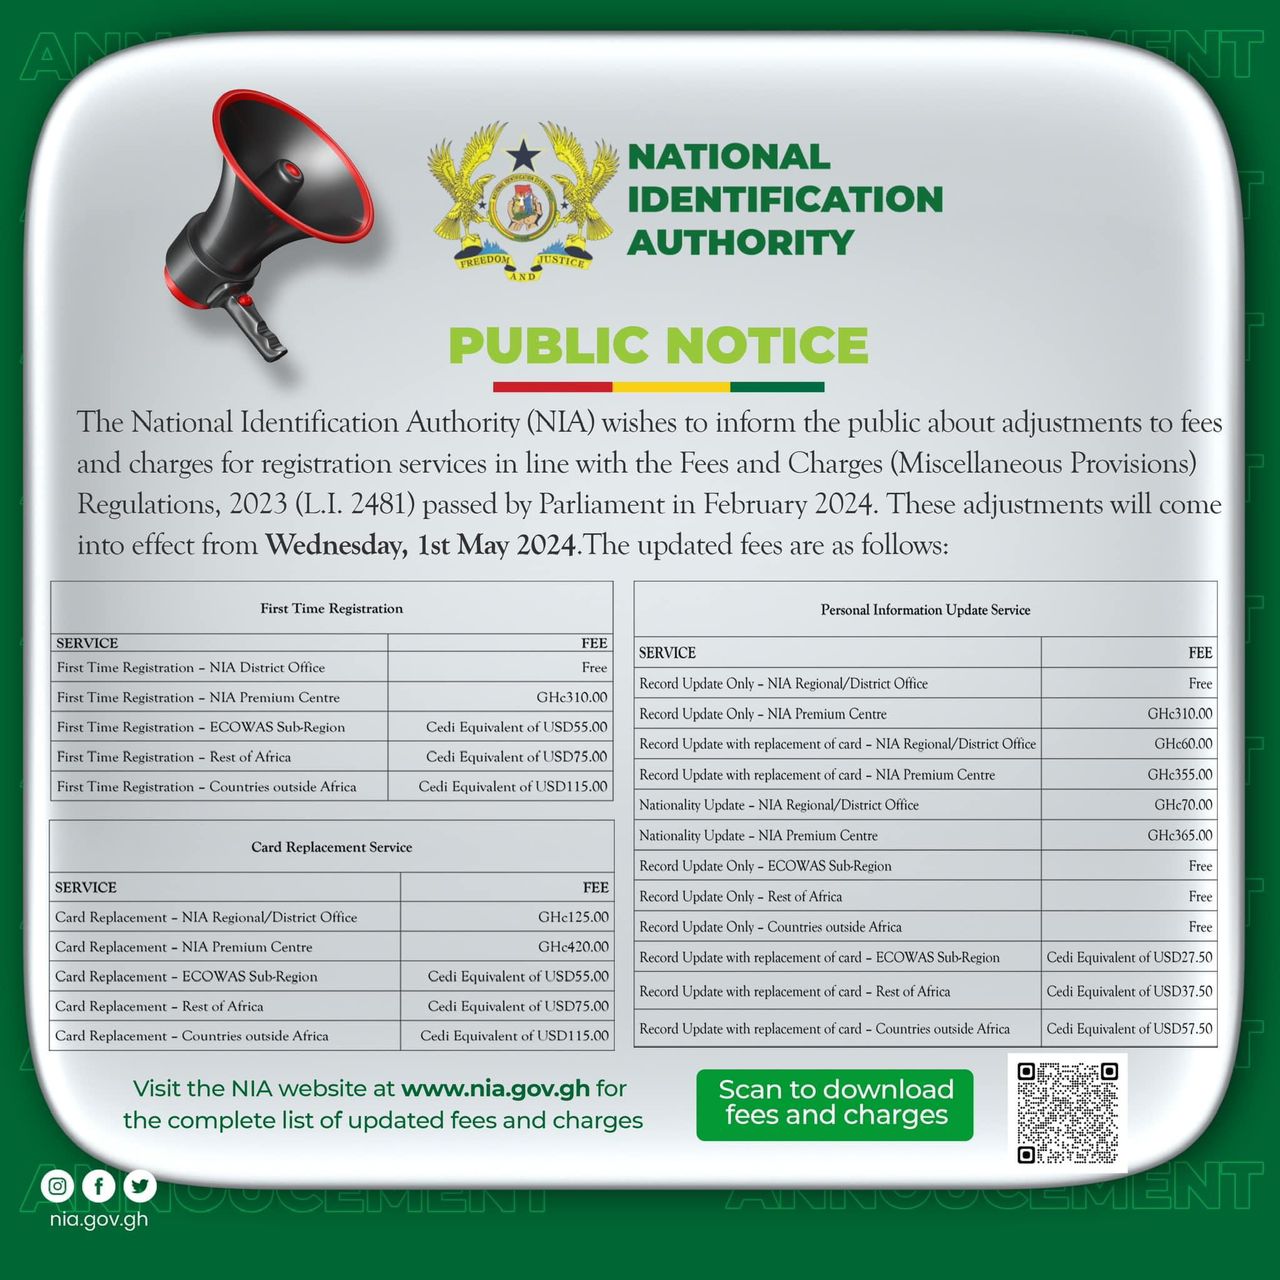 NIA announces new fees for registration services effective May 1